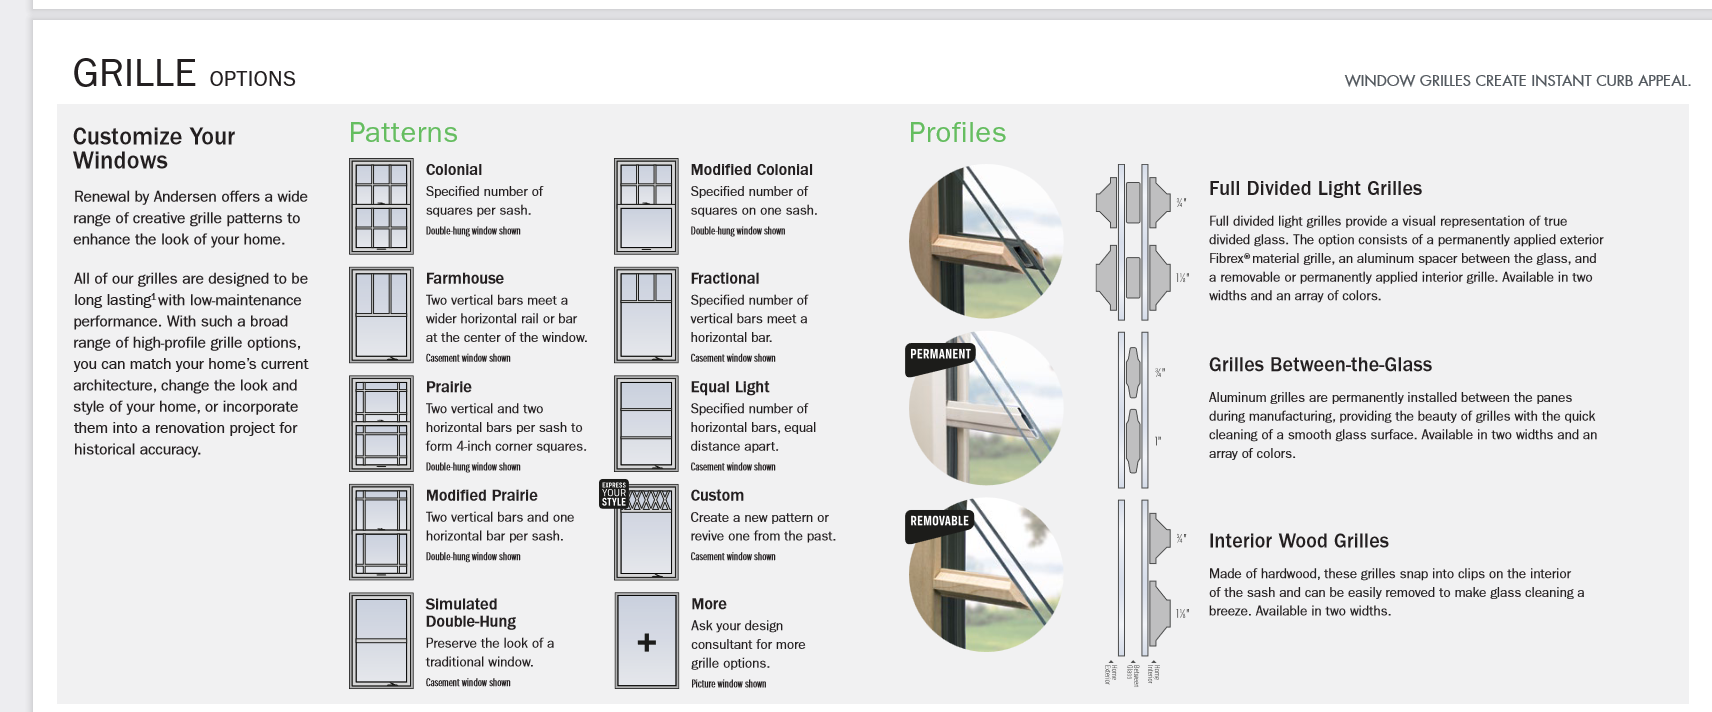 A screenshot of window grille options on the Renewal by Andersen website.